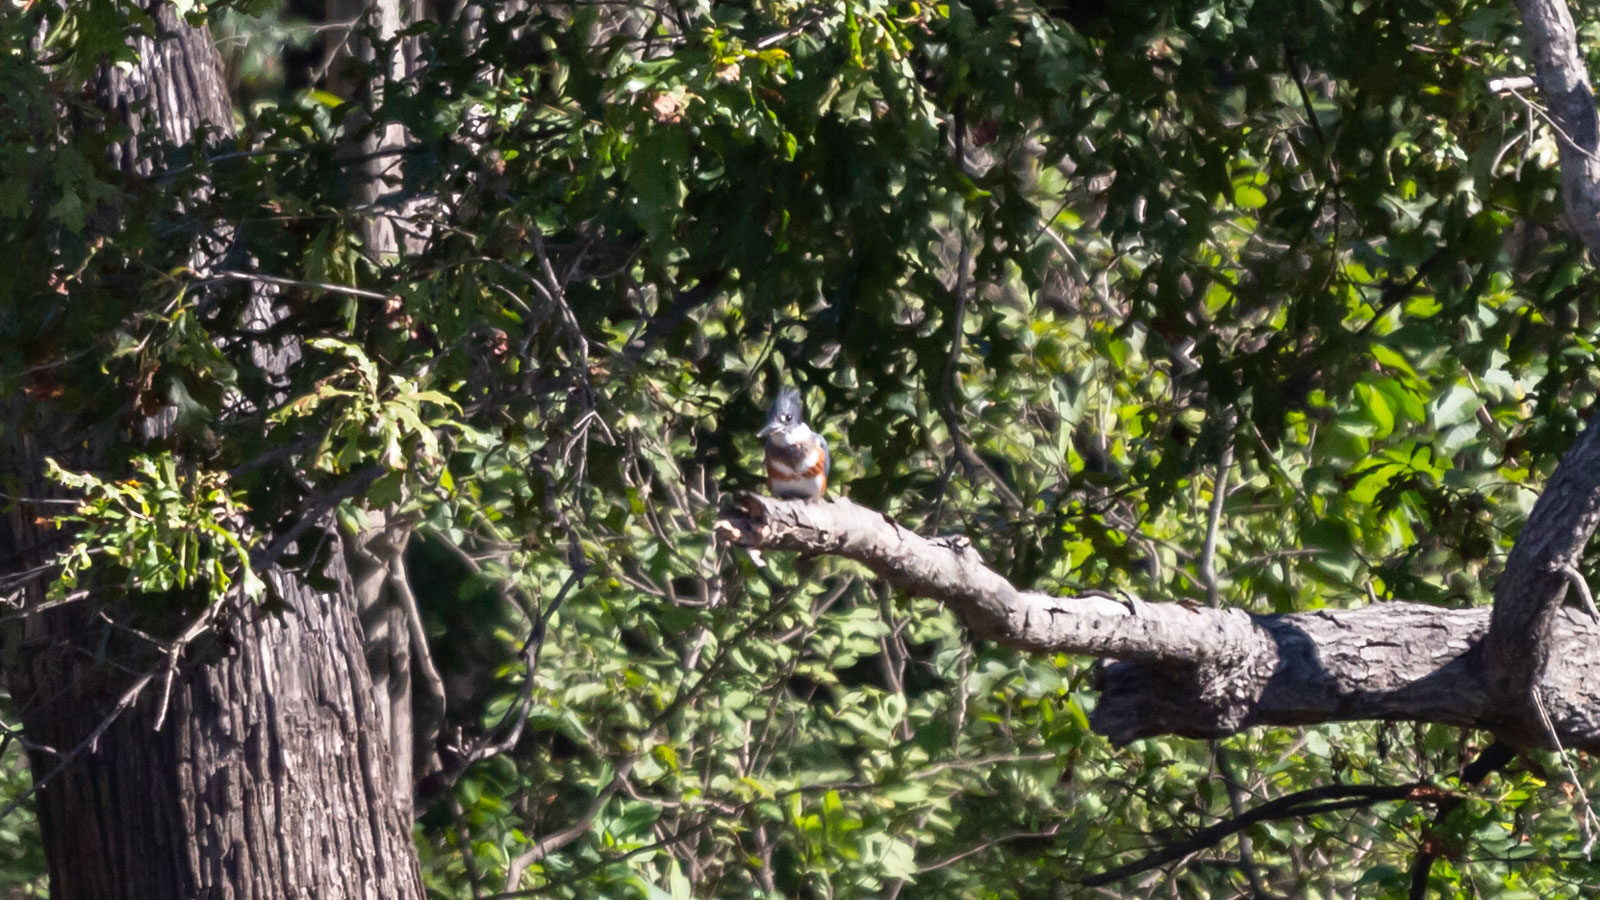 Belted kingfisher perched on a branch